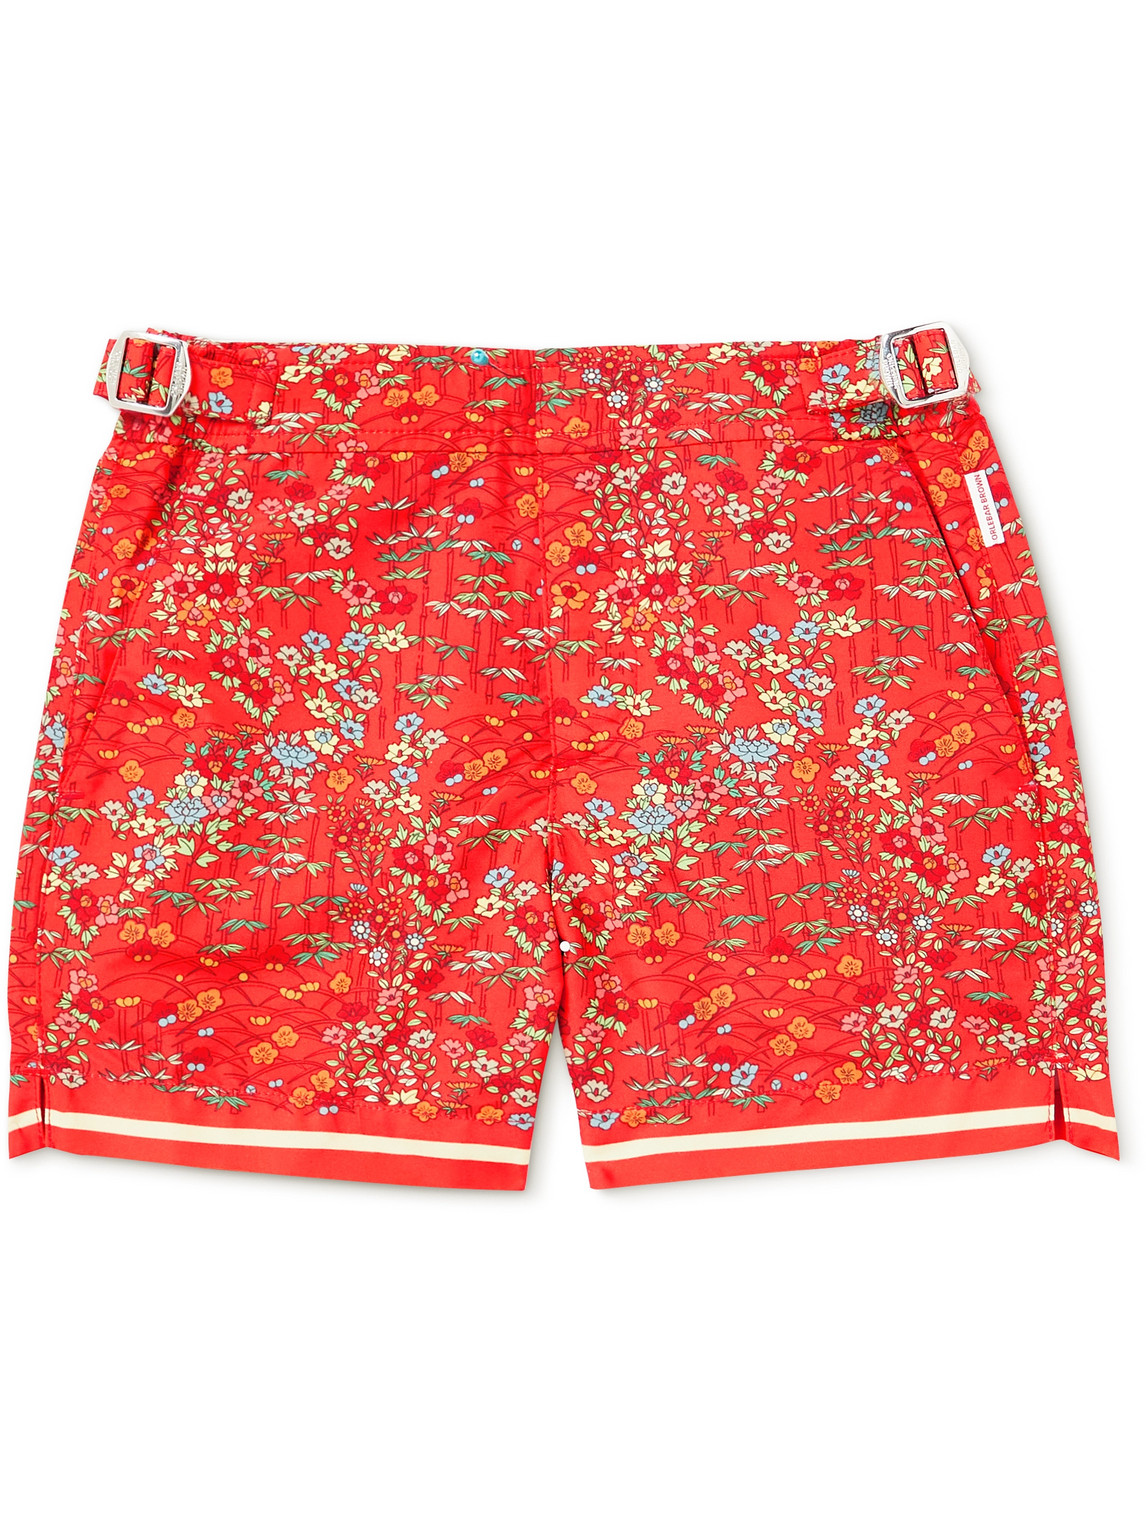 ORLEBAR BROWN RUSSELL SOLO FANTASY FLORAL-PRINT SWIM SHORTS